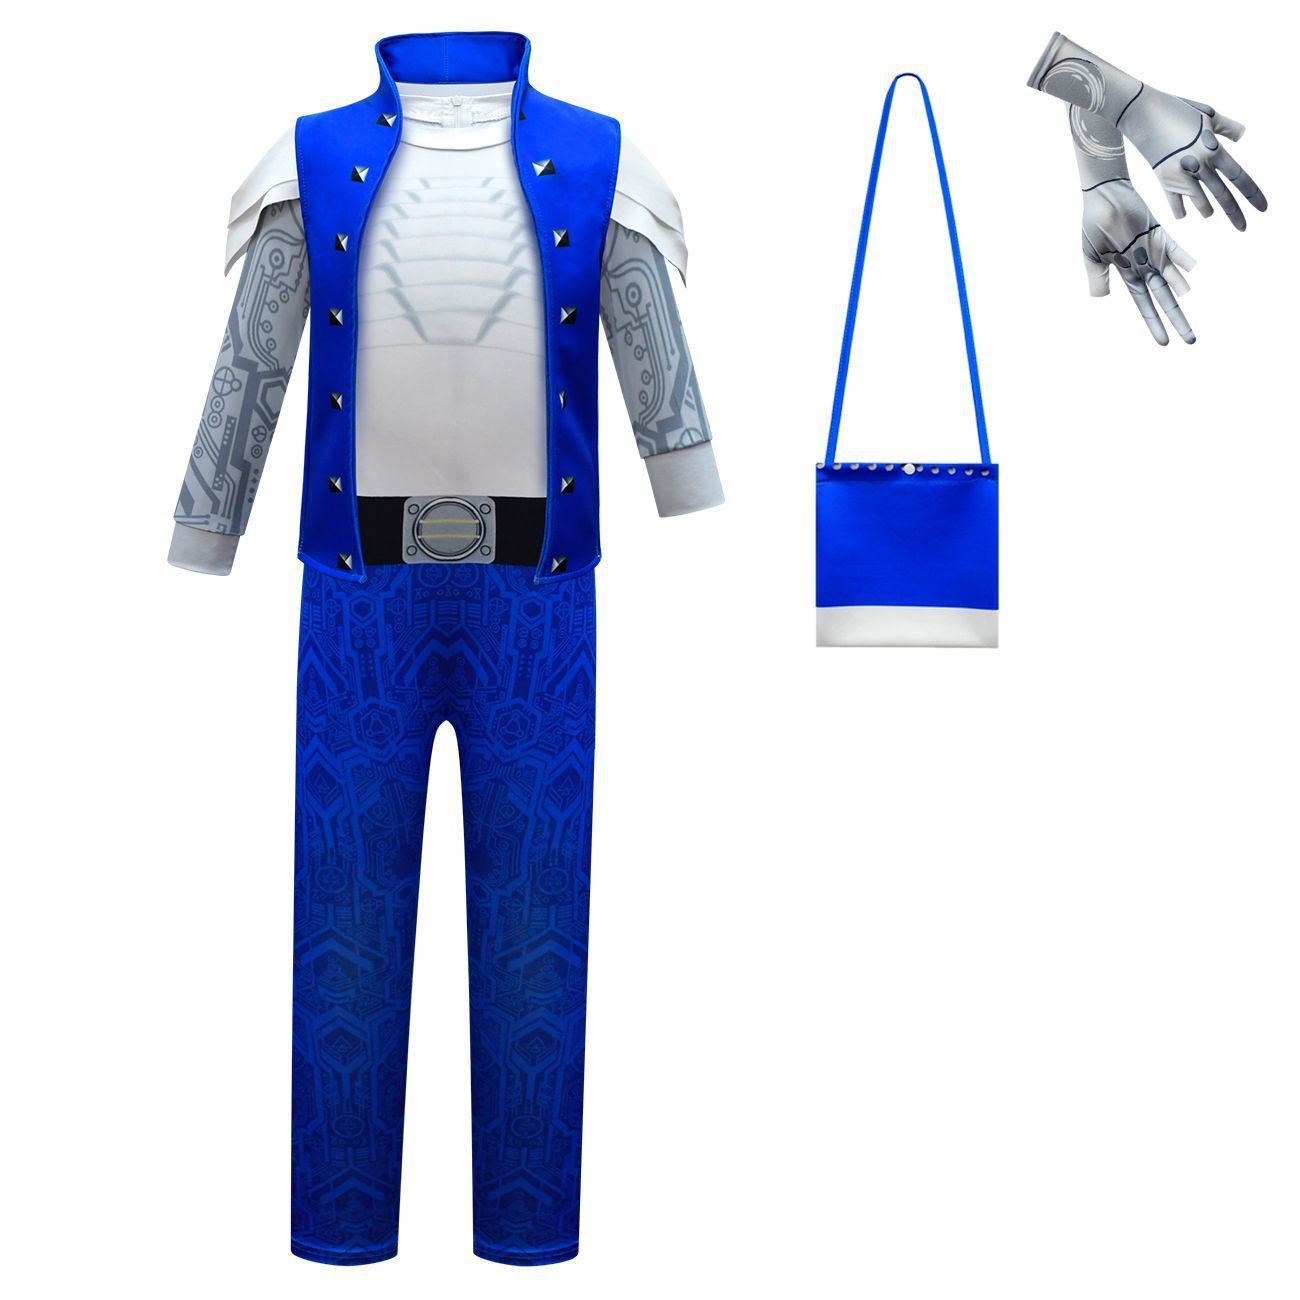 Blue College Zombies Cosplay Zentai Suit Costume Jumpsuit Bodysuit Outfits for kids